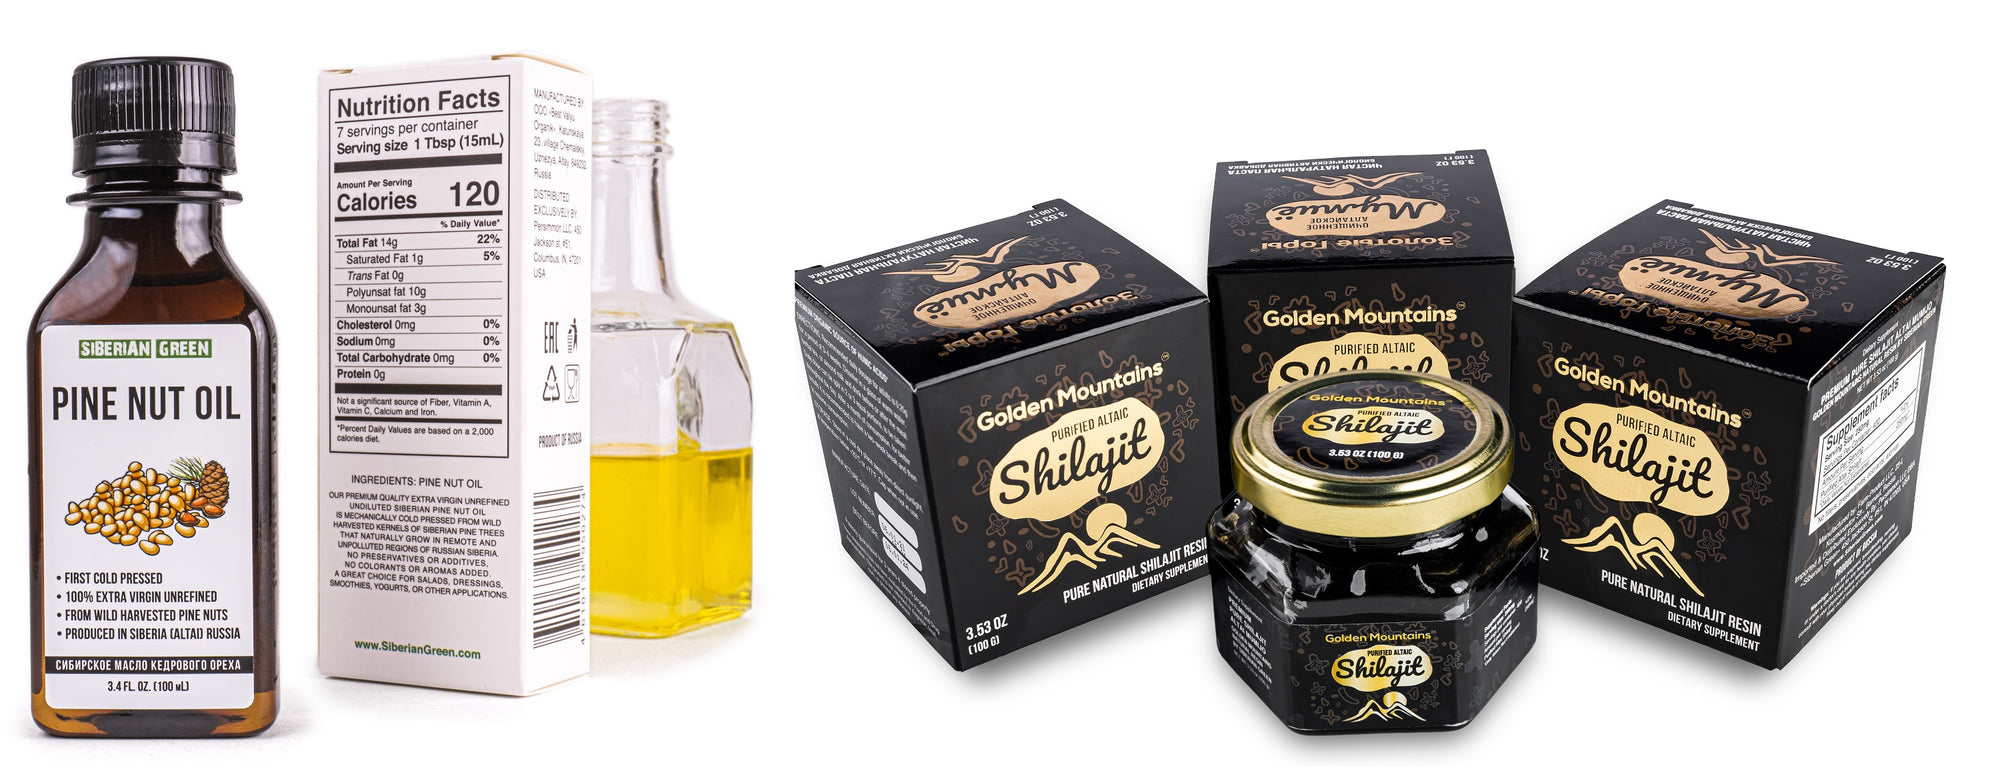 Pine Nut Oil and Shilajit: Great Benefits of The 'Siberian Combo'